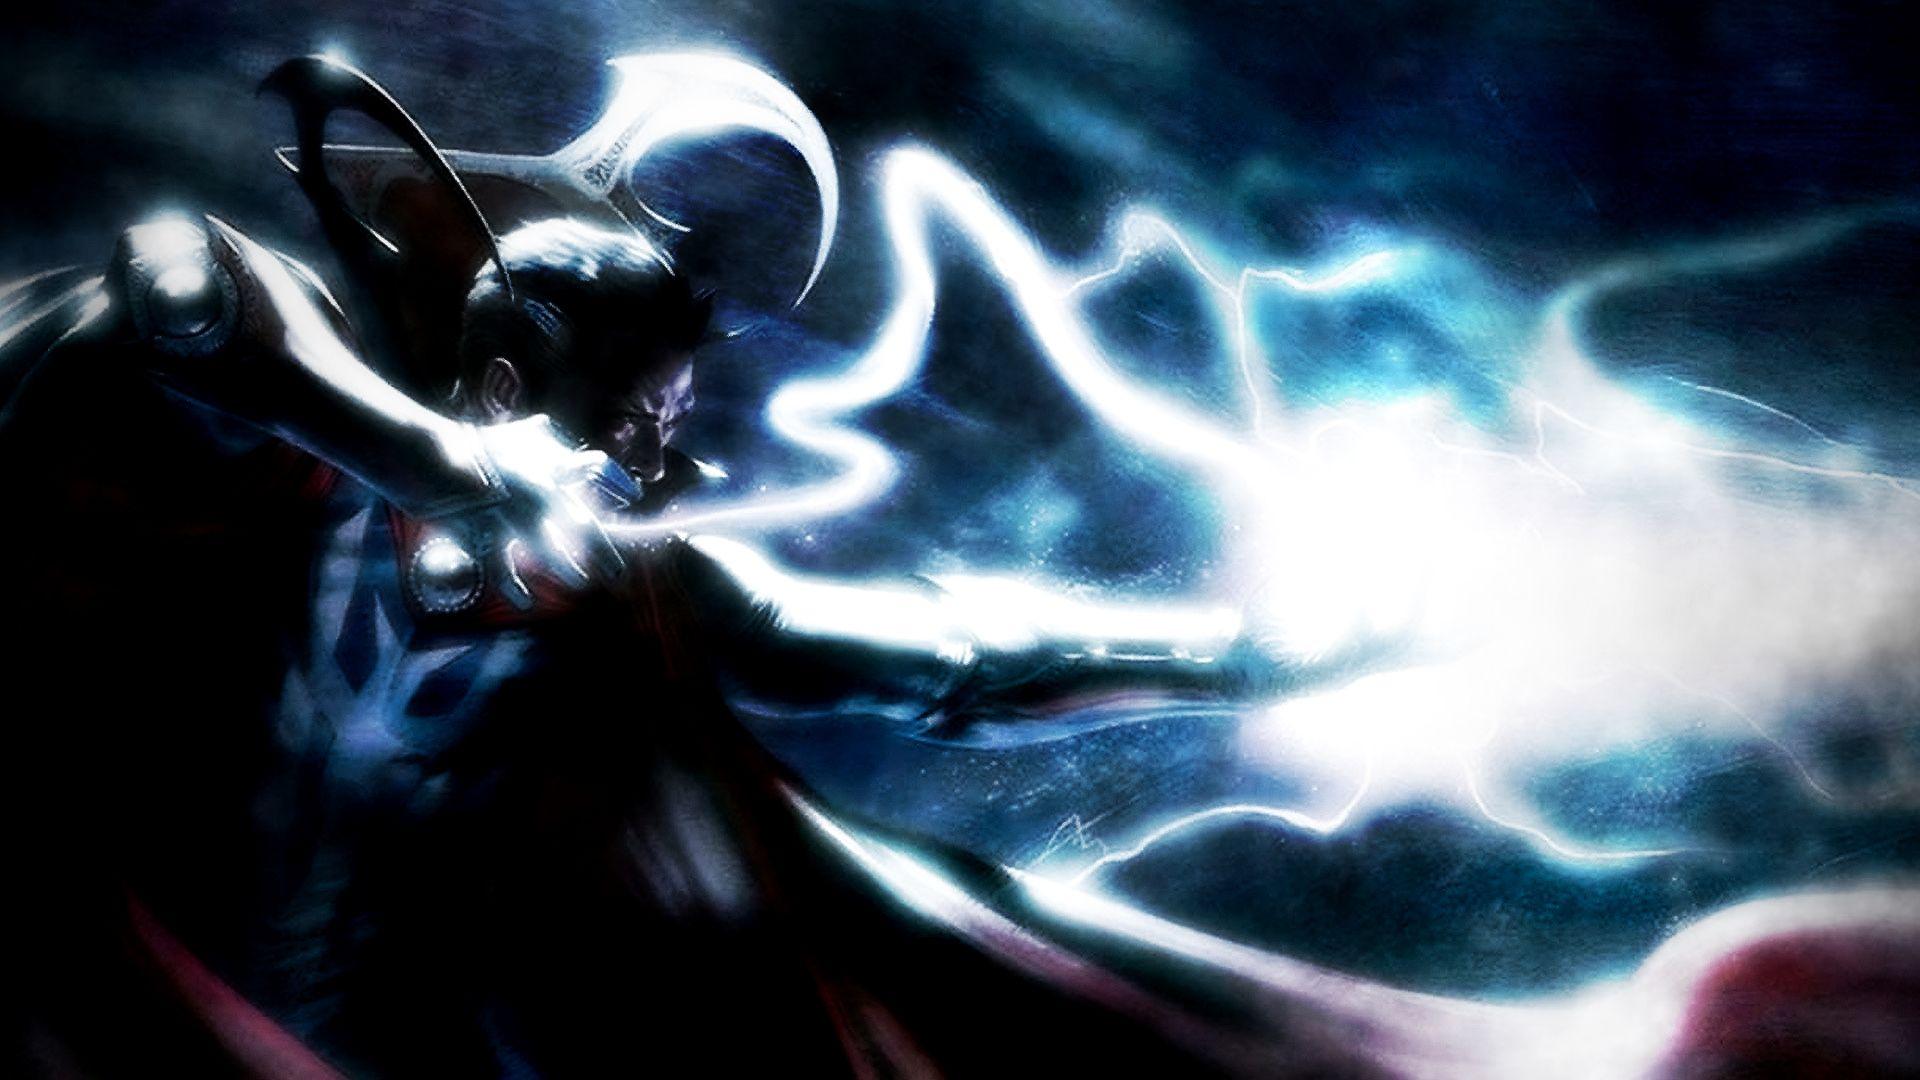 Download Dr Strange Wallpapers For iPhone & iPad